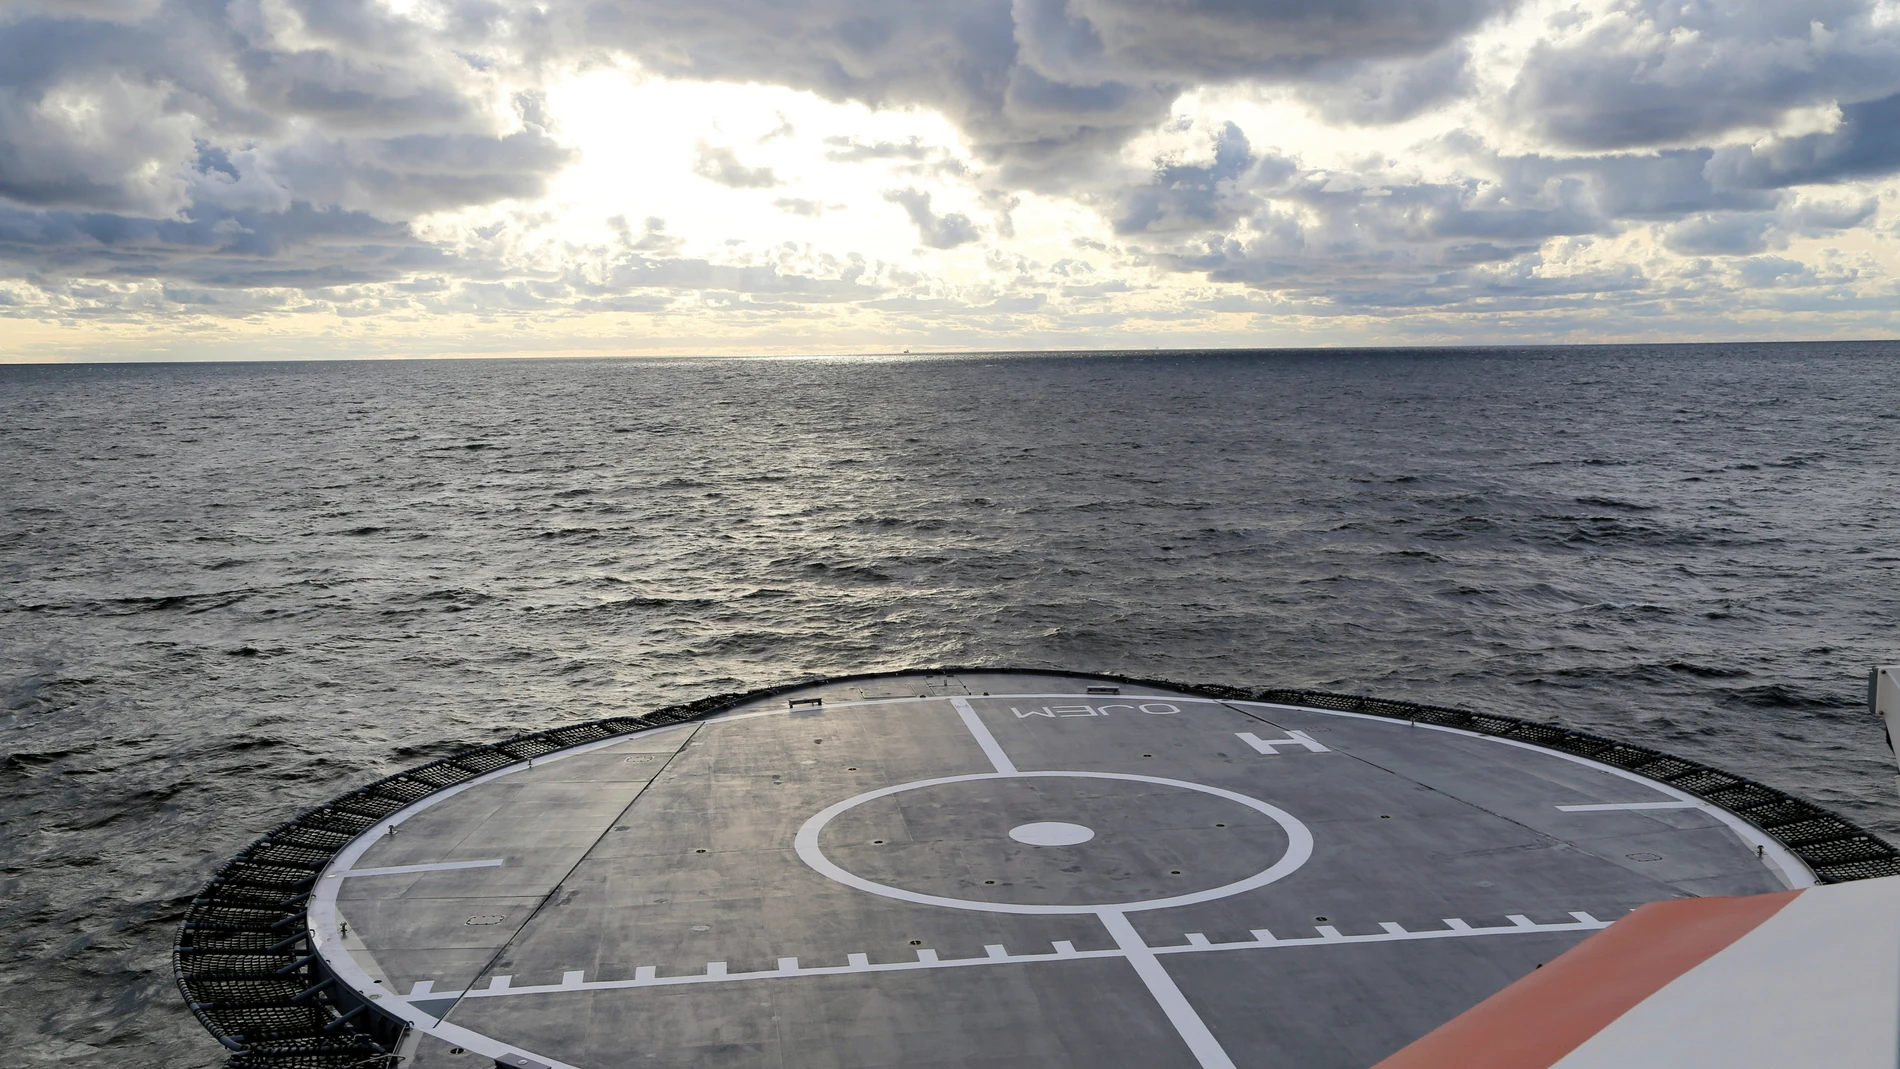 In this picture provided by The Finnish Border Guard, Finnish Border Guard's offshore vessel Turva on patrol at sea, Tuesday, Oct. 10, 2023 near the place where damaged Balticconnector gas pipeline is pinpointed at the Gulf of Finland. Finnish and Estonian gas system operators on Sunday said they noted an unusual drop in pressure in the Balticconnector pipeline after which they shut down the gas flow. The Finnish government on Tuesday said there was damage both to the gas pipeline and to a te...